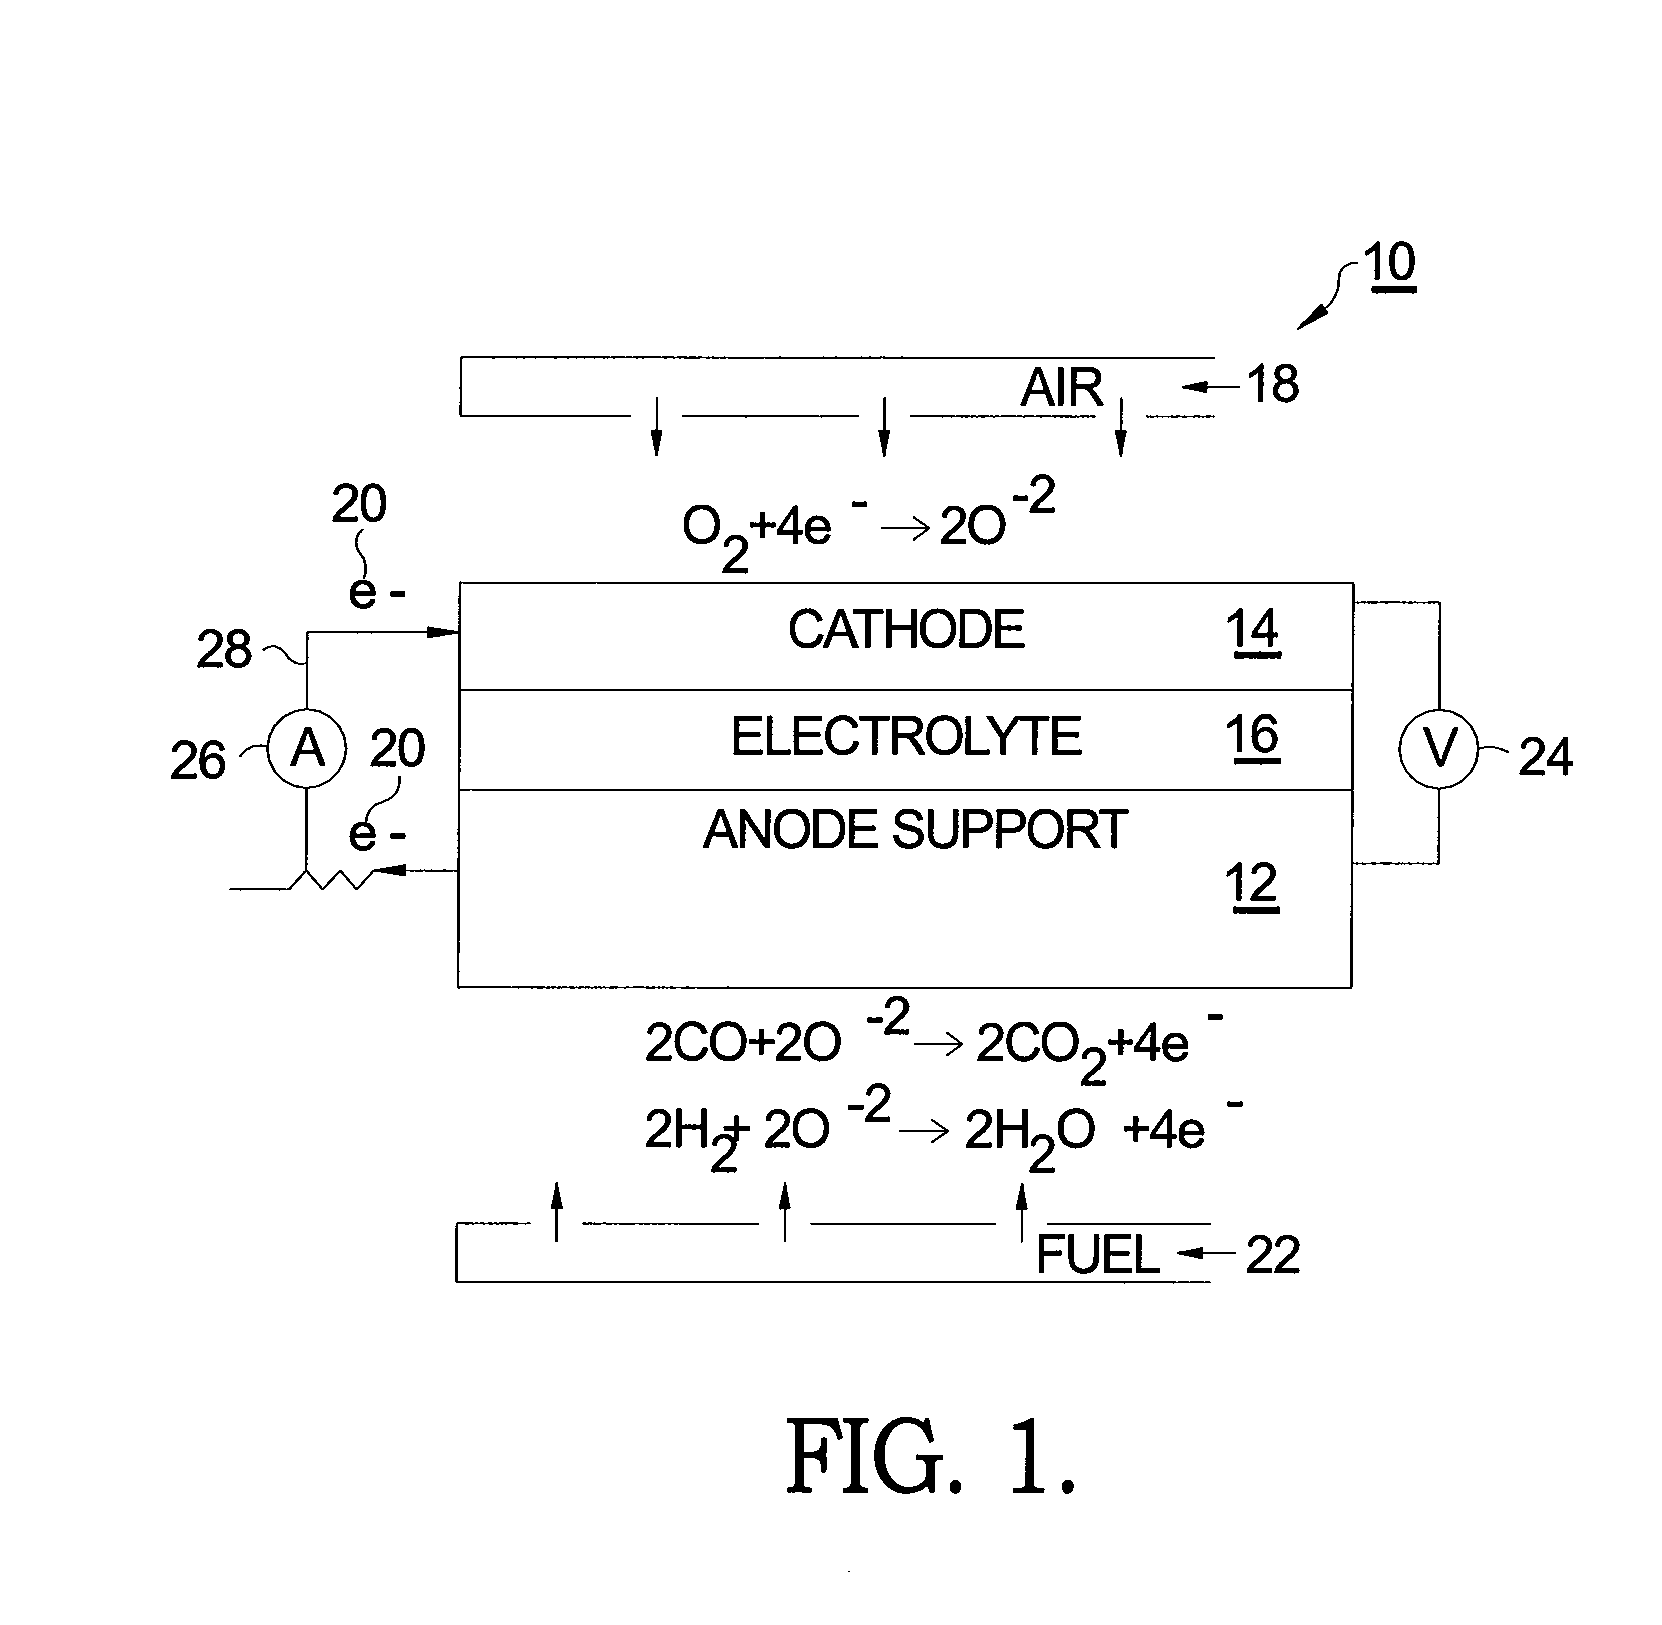 Method for Impregnating a Solid Oxide Fuel Cell Cathode with Silver to Reduce Electrical Resistance